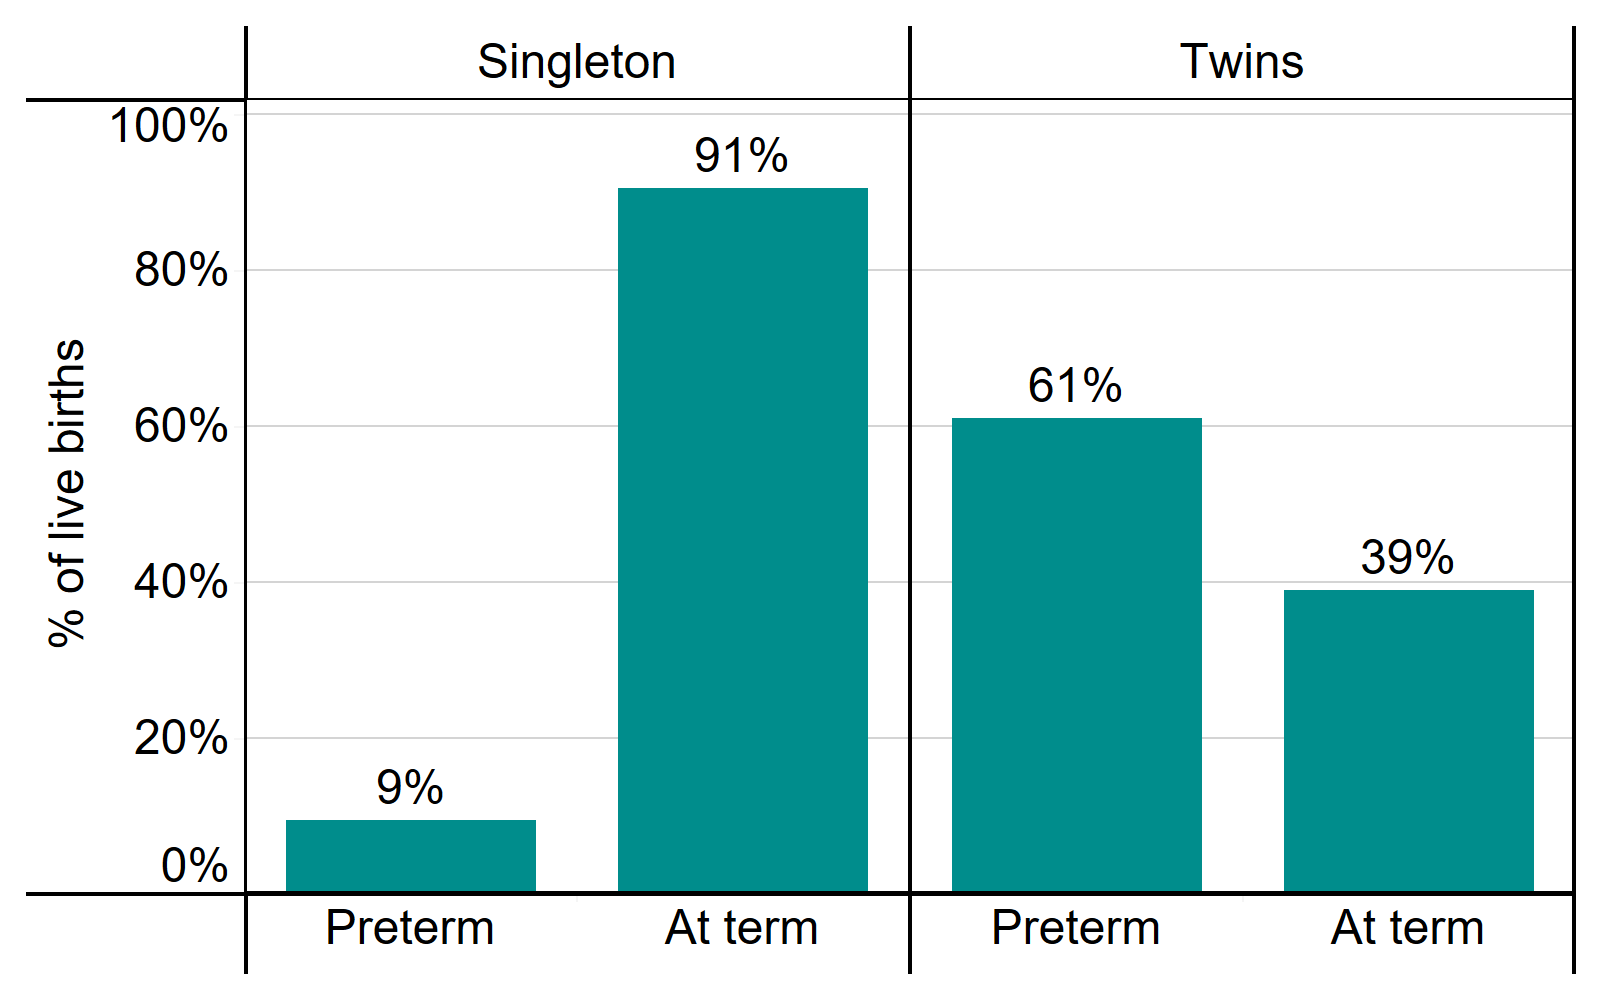 Figure 8: Percent of IVF live births born pre-term or at term by singleton and twin births, 2015-2019. Percent of IVF live births born pre-term or at term by singleton and twin births, 2015-2019. This bar chart shows the percent of IVF live births born pre-term or at term by singleton and twin births, using data from 2015 to 2019. A greater percentage of twin pregnancies are born premature compared to singleton pregnancies, at 61% and 9% respectively. An accessible form of the underlying data for this figure can be downloaded beneath the image in .xls format.